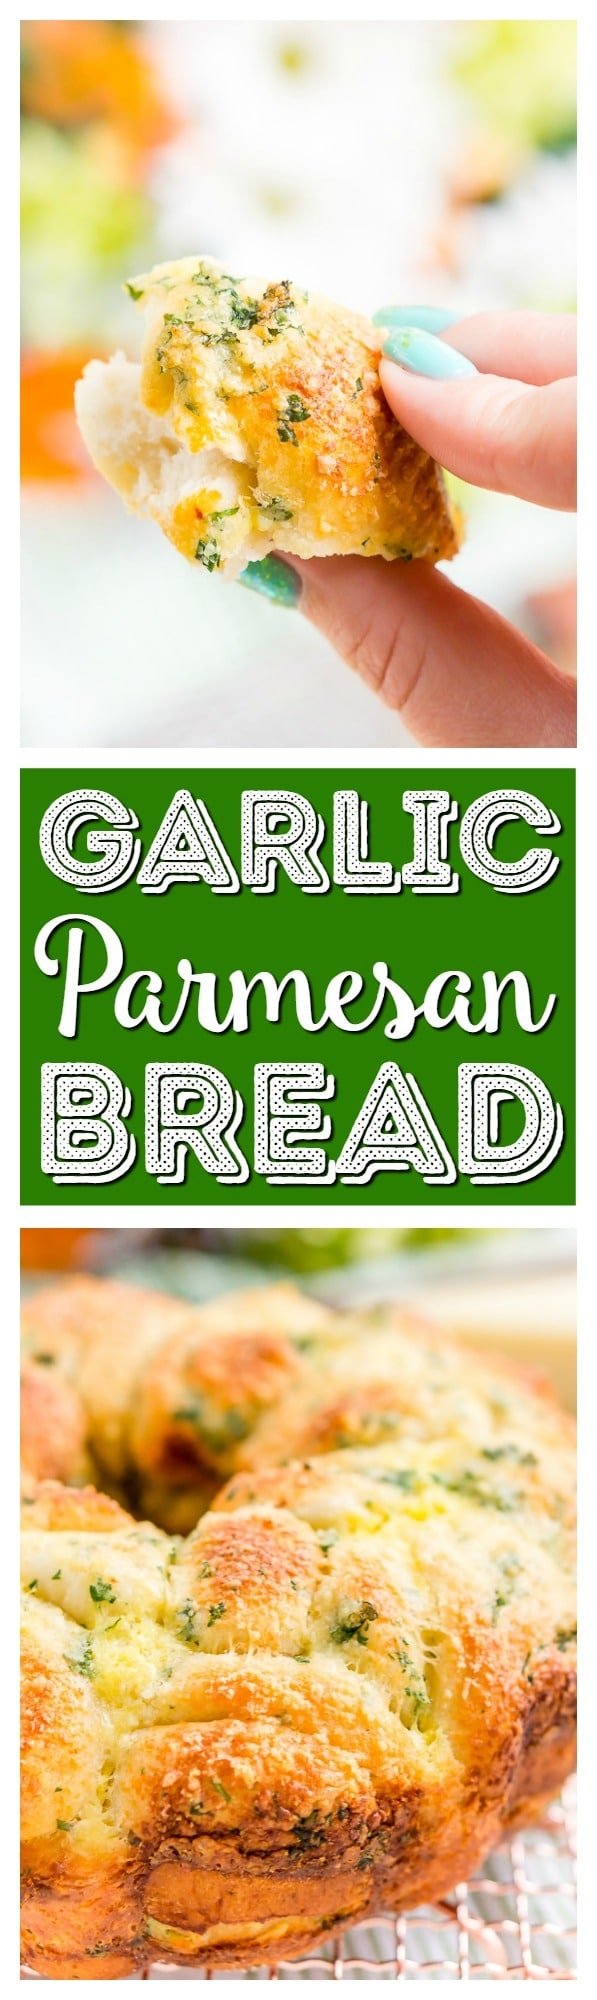 This Garlic Parmesan Monkey Bread is so easy to make and packs tons of flavor! Perfect as a savory side for brunch and dinner! via @sugarandsoulco